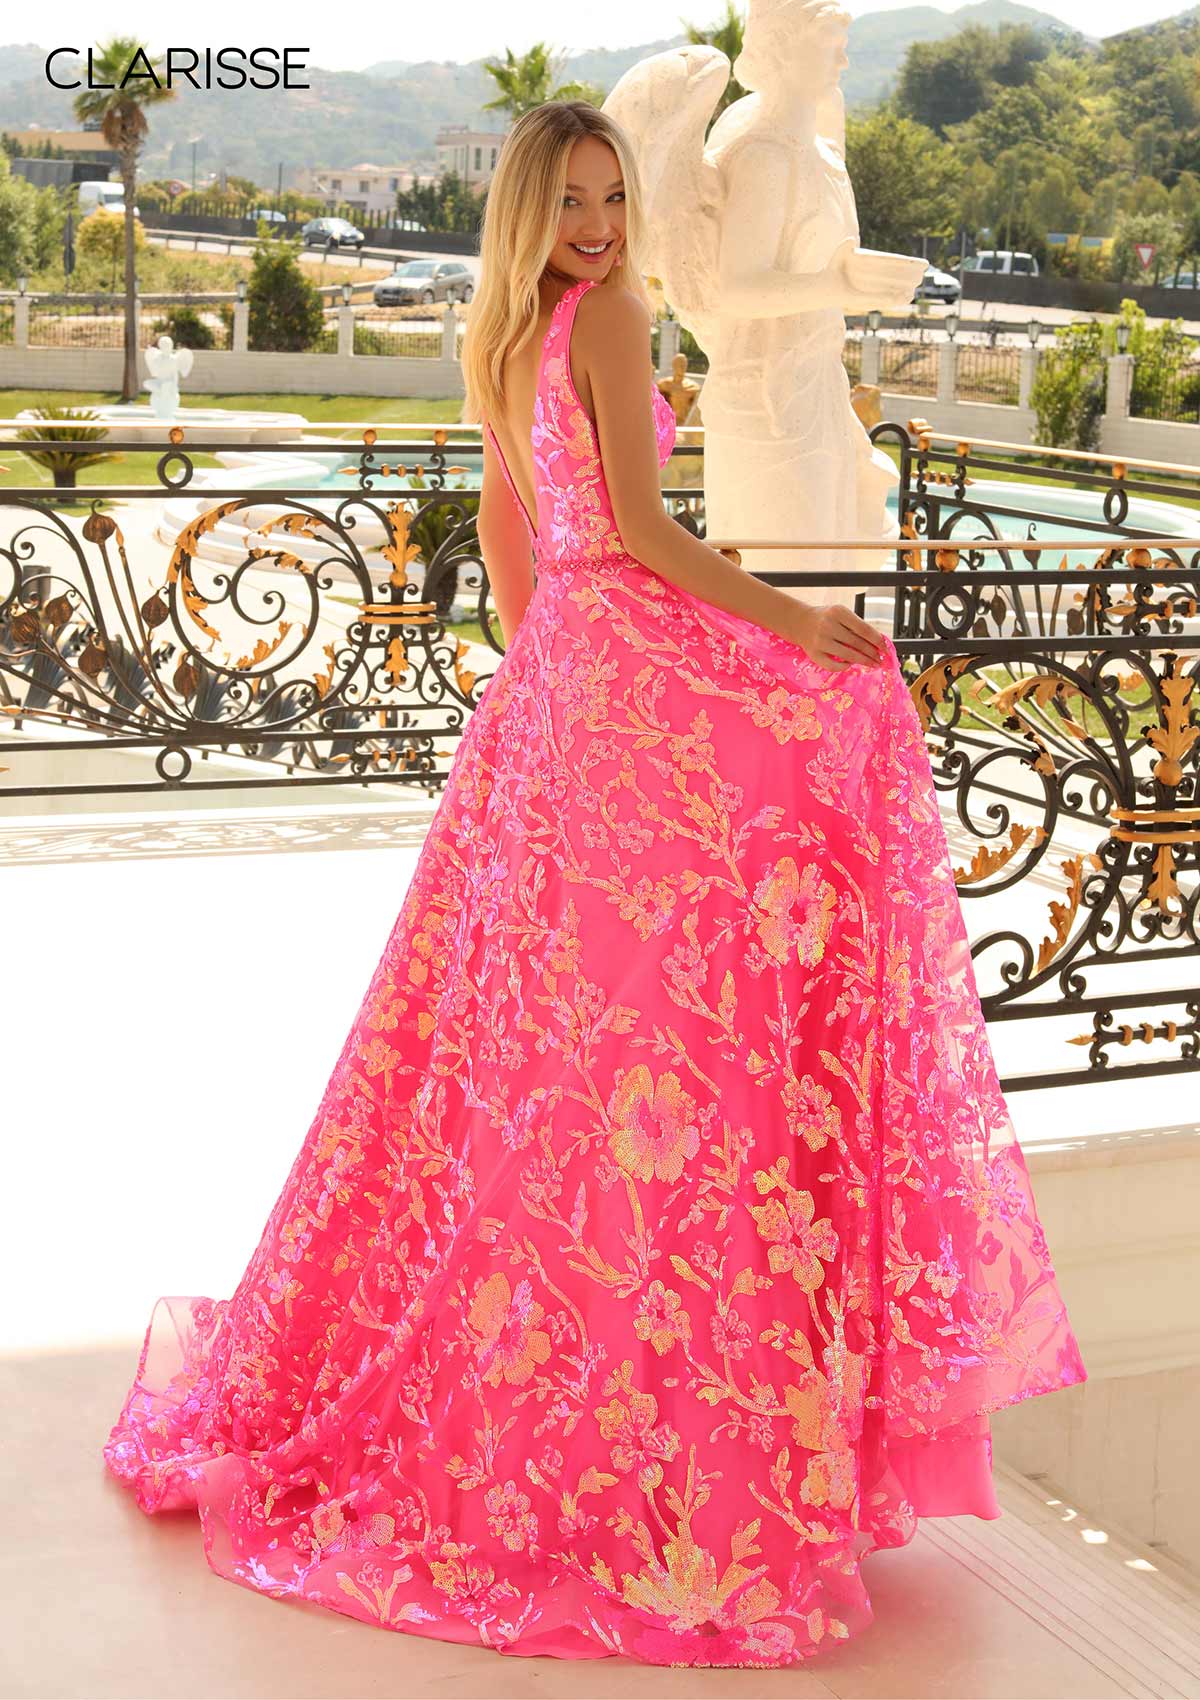 Clarisse - 810458 - All Dressed Up, Prom/Party Dress - 00 - Dresses Two Piece Cut Out Sweetheart Halter Low Back High Neck Print Beaded Chiffon Jersey Fitted Sexy Satin Lace Jeweled Sparkle Shimmer Sleeveless Stunning Gorgeous Modest See Through Transparent Glitter Special Occasions Event Chattanooga Hixson Shops Boutiques Tennessee TN Georgia GA MSRP Lowest Prices Sale Discount